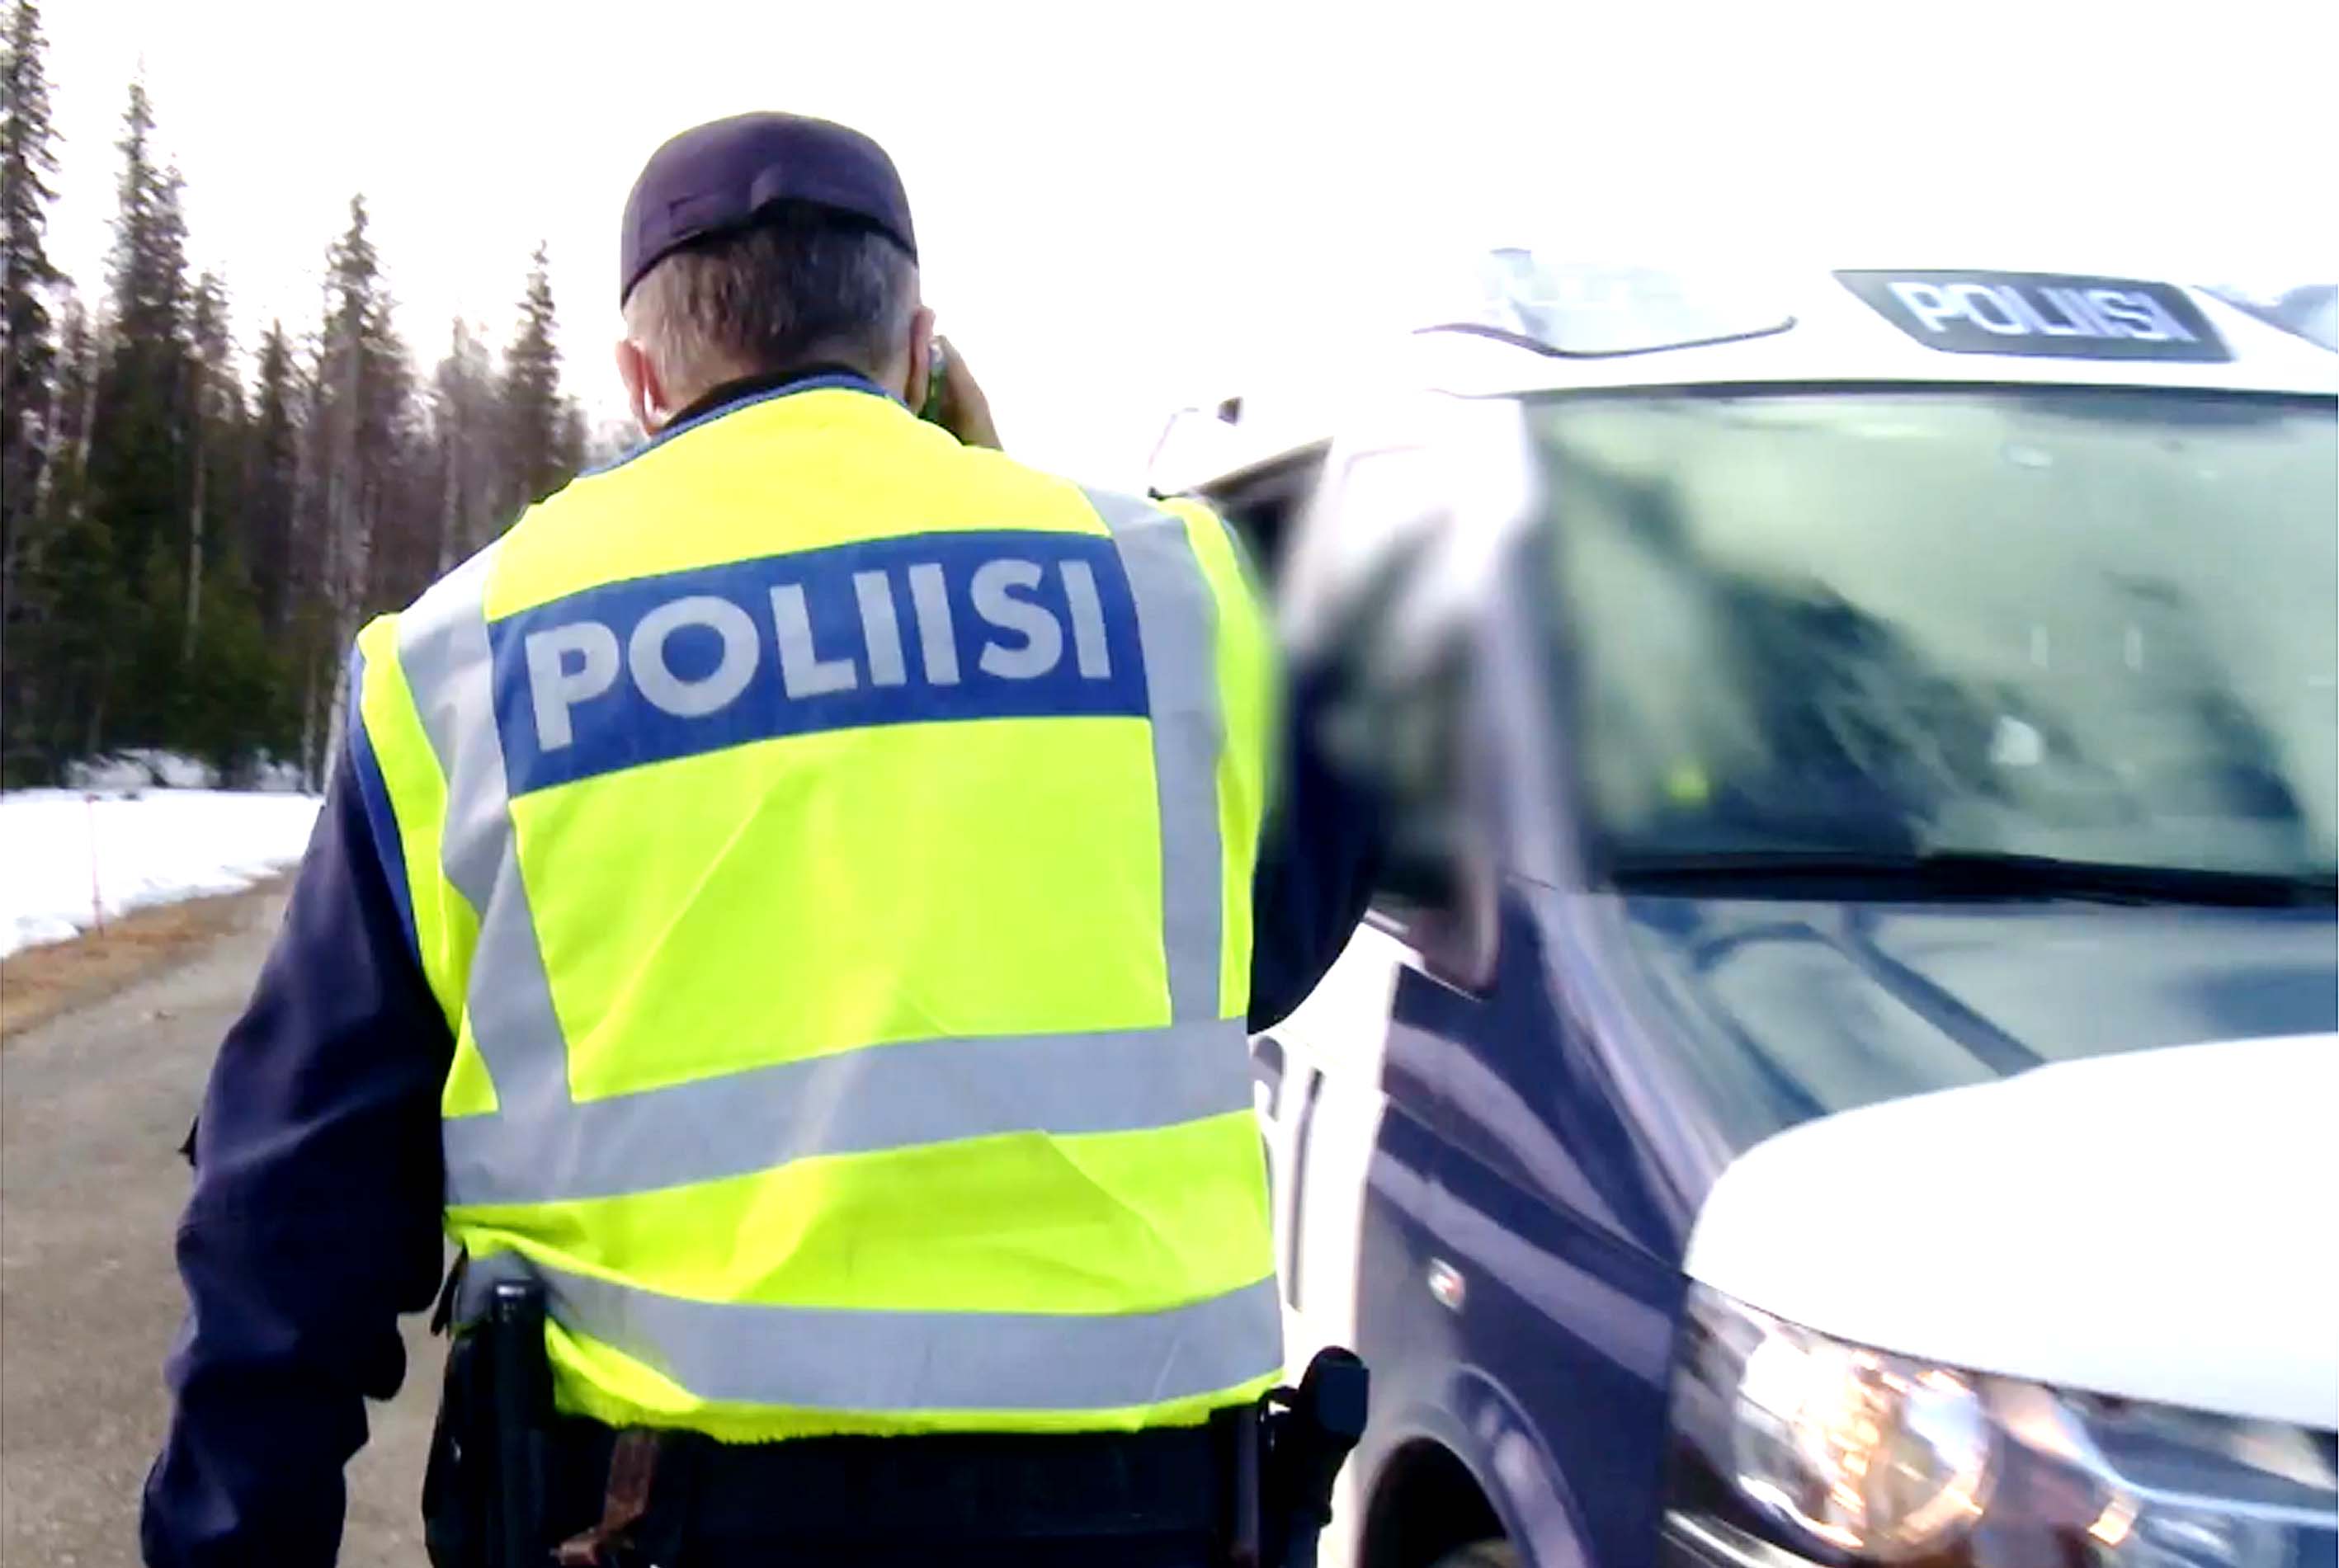 Poliisi twitter tampere